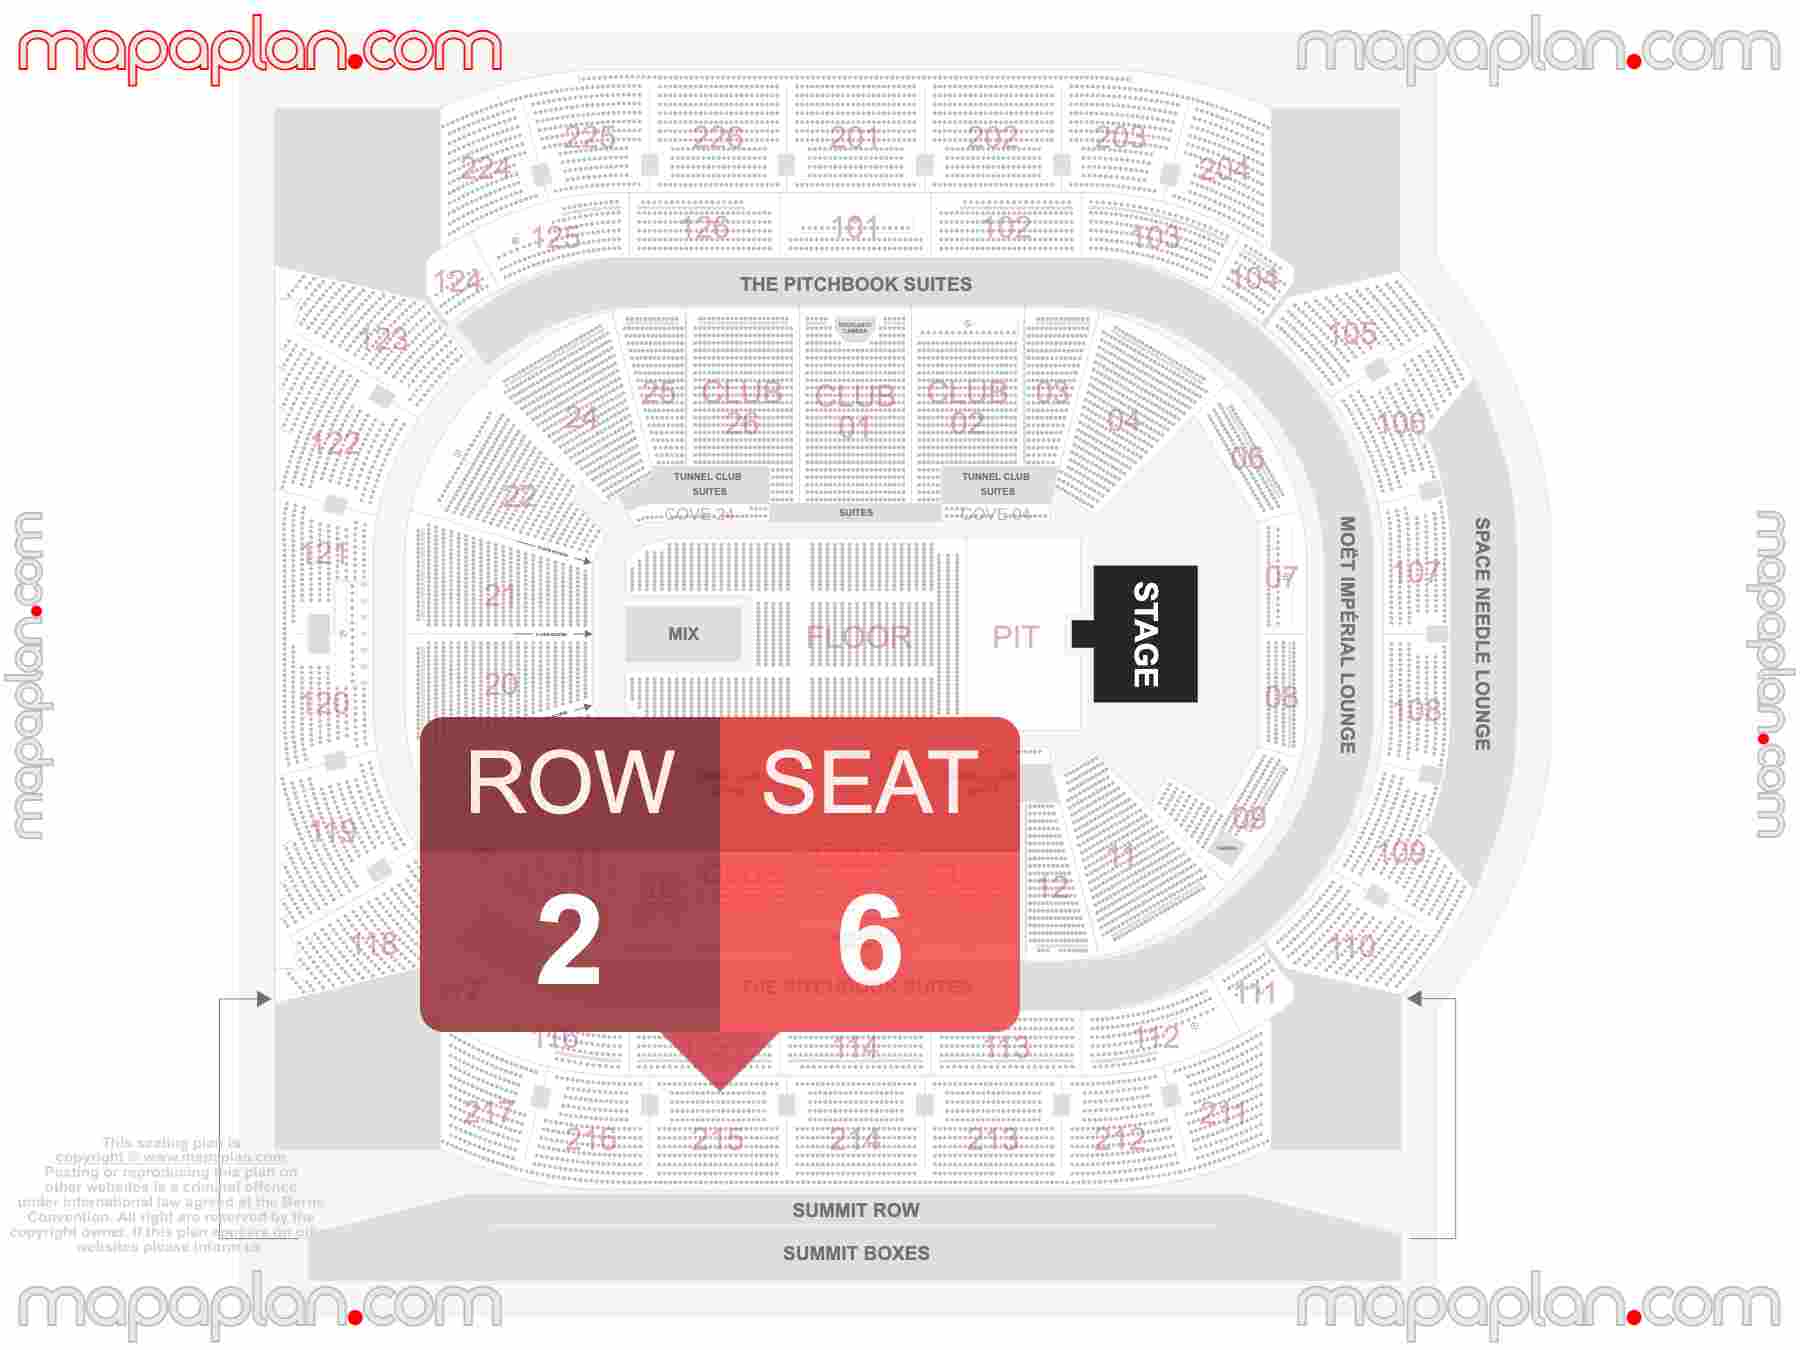 Seattle Climate Pledge Arena seating chart Concert with floor general admission PIT floor standing room only find best seats row numbering system plan showing how many seats per row - Individual 'find my seat' virtual locator